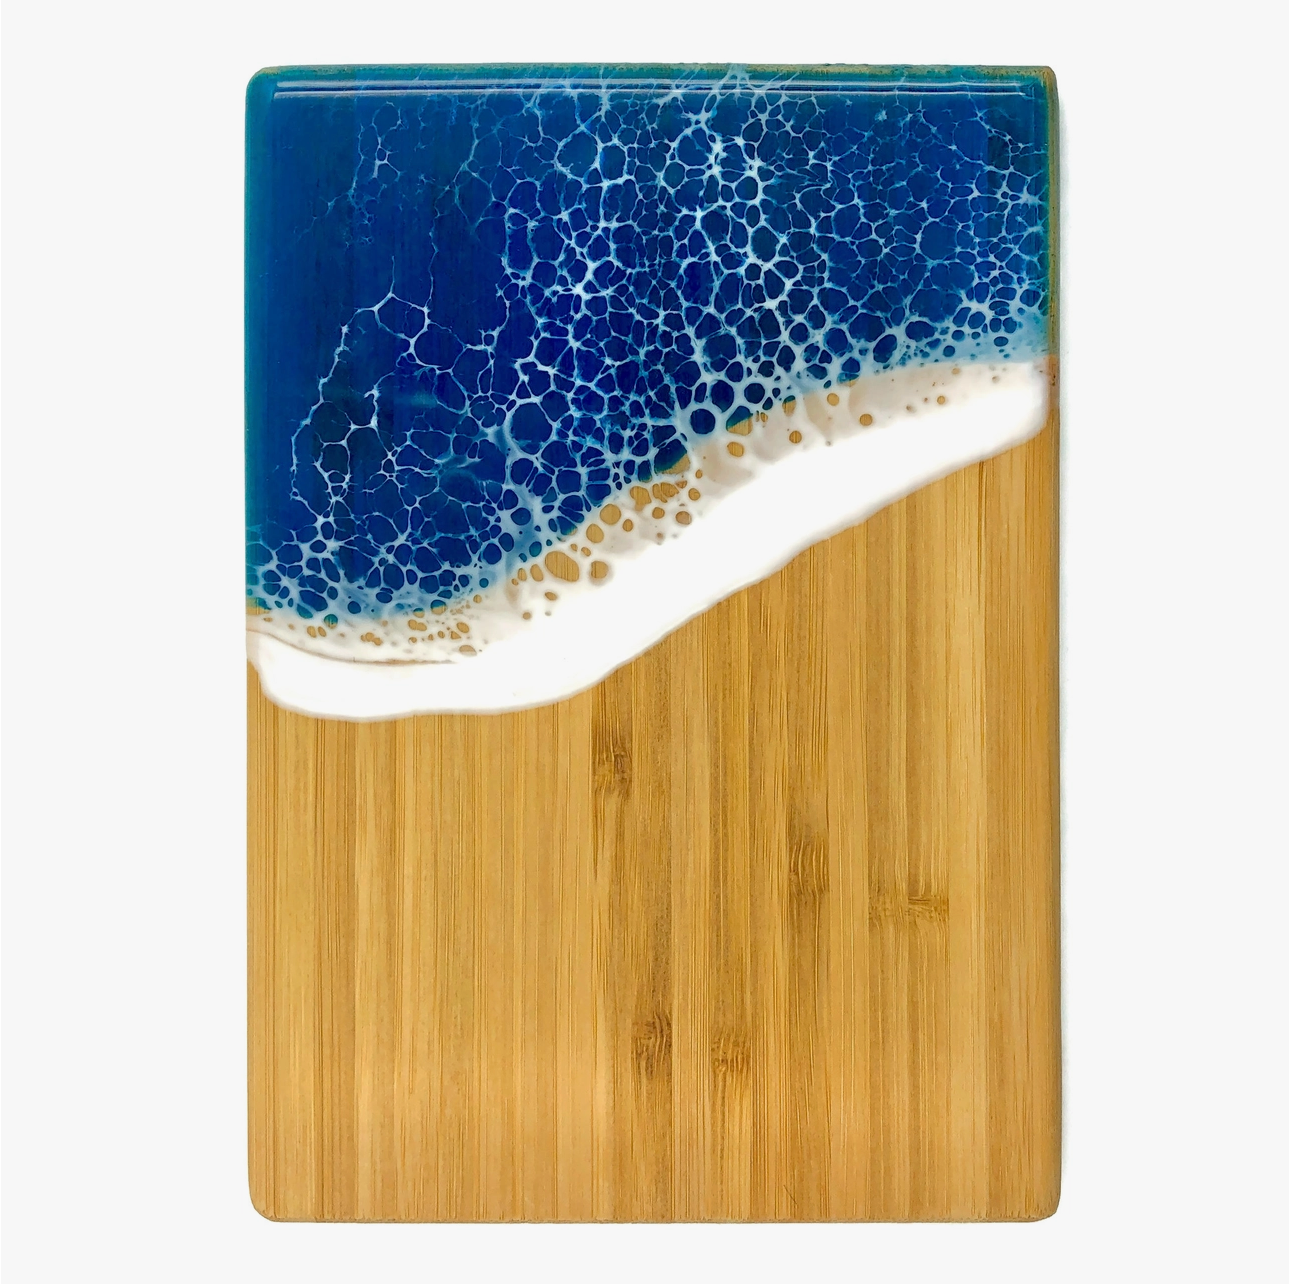 Small Cutting Board in Ocean Blue - Heart of the Home LV